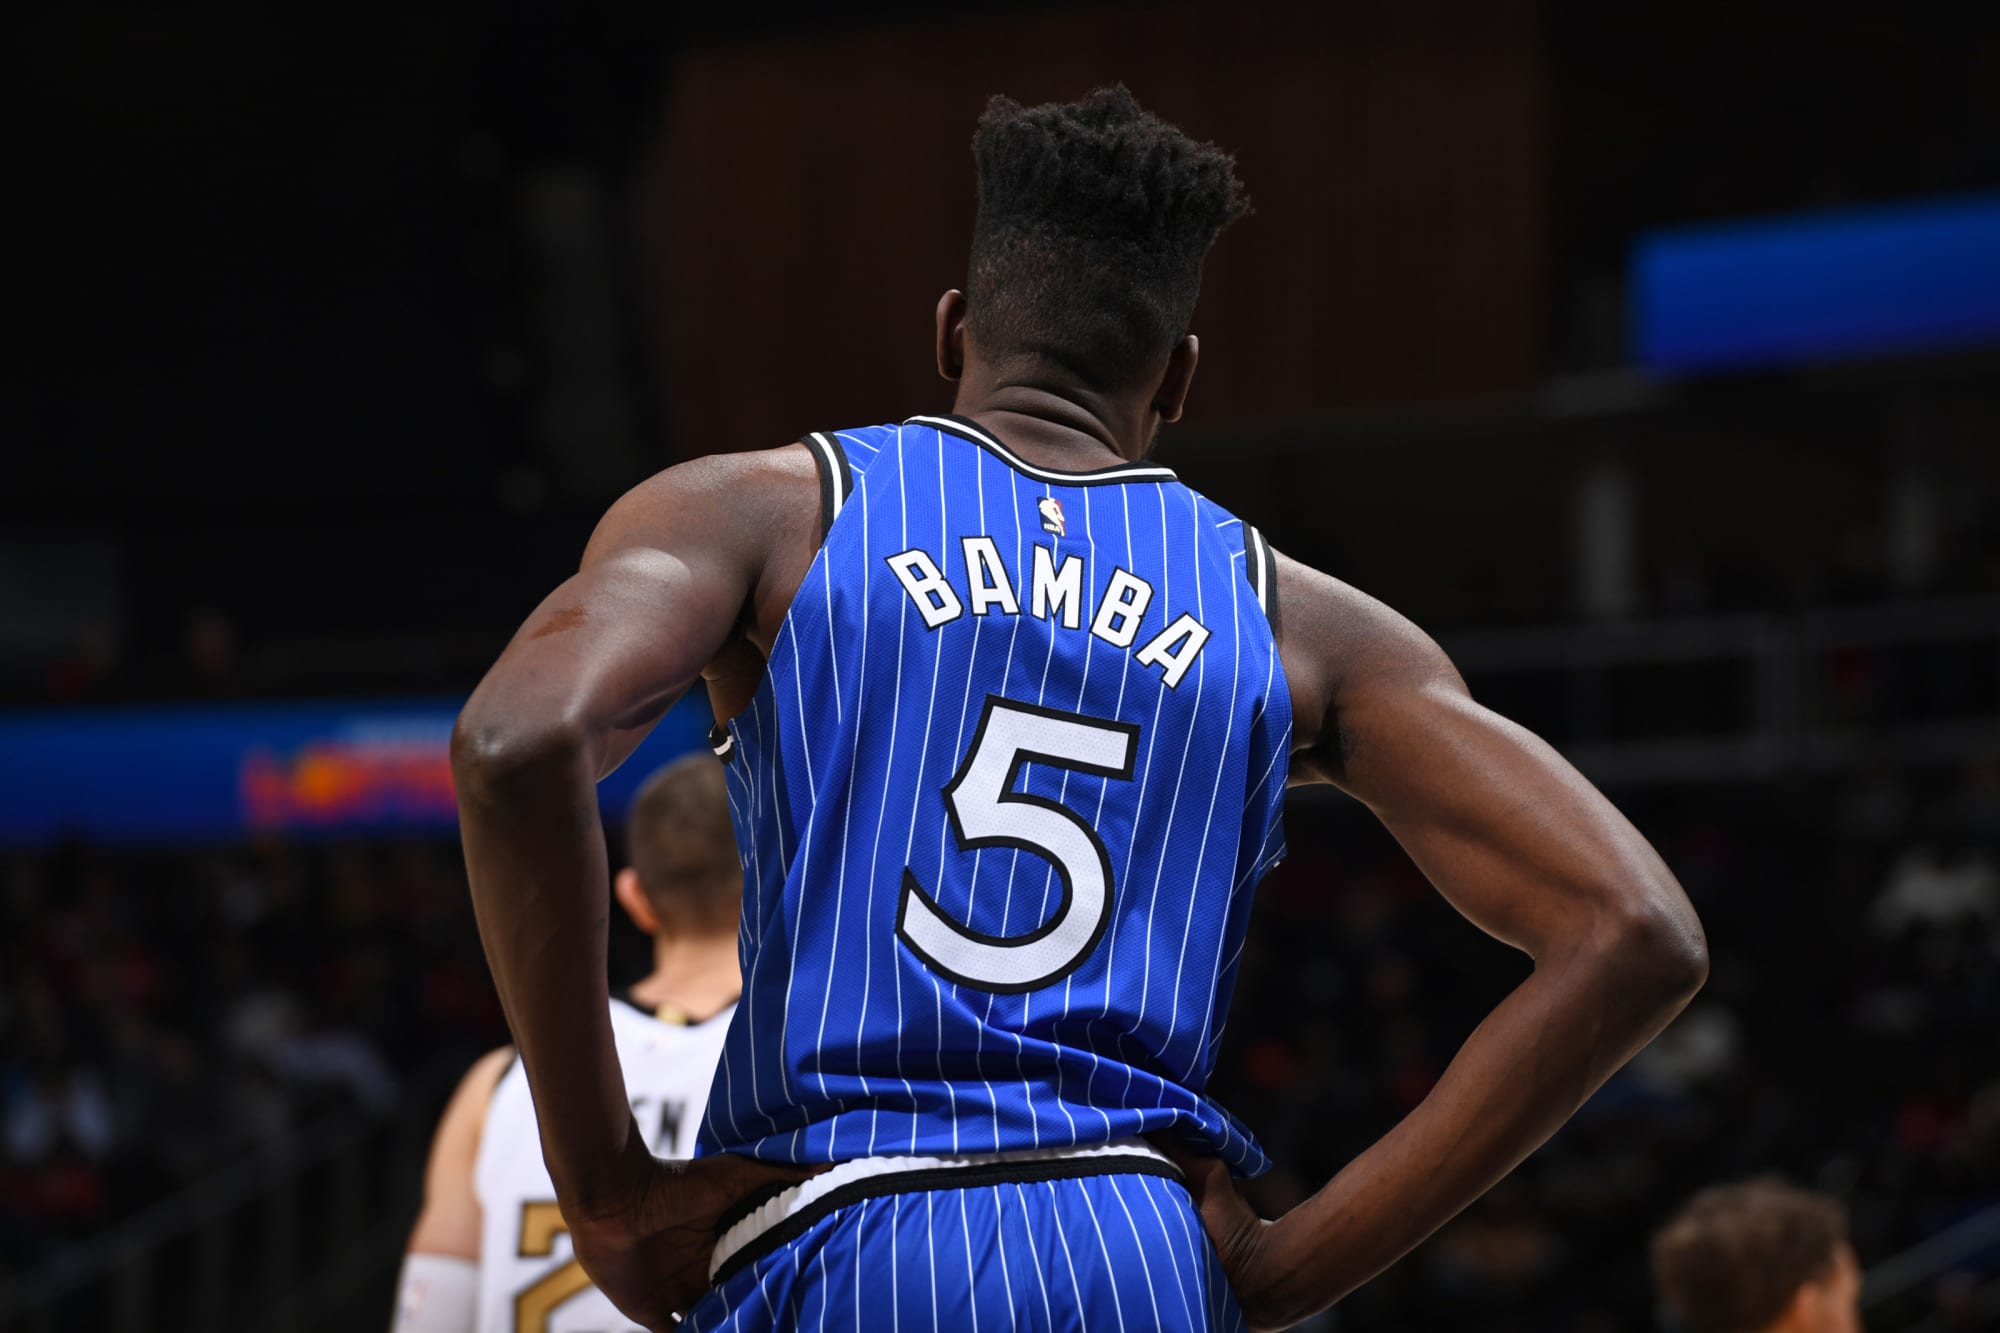 Orlando Magic fans must remain patient with Bamba